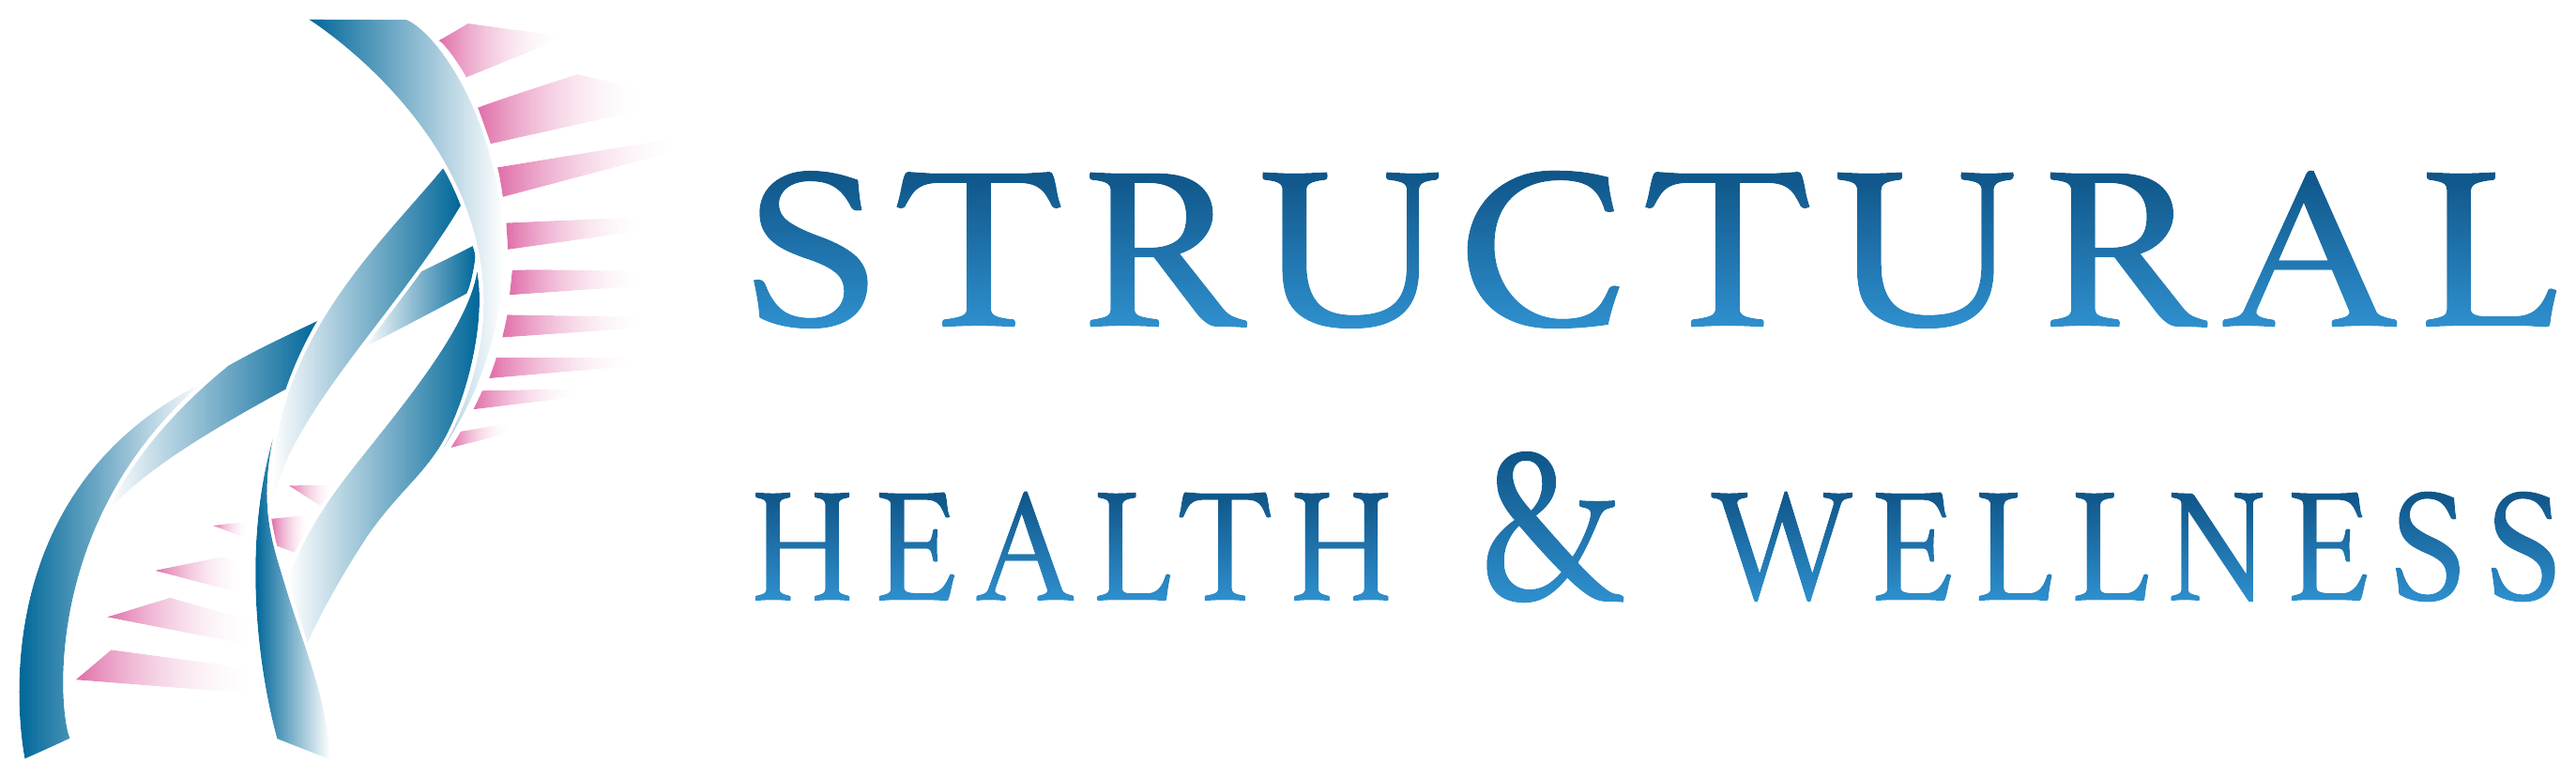 Structural Health and Wellness logo